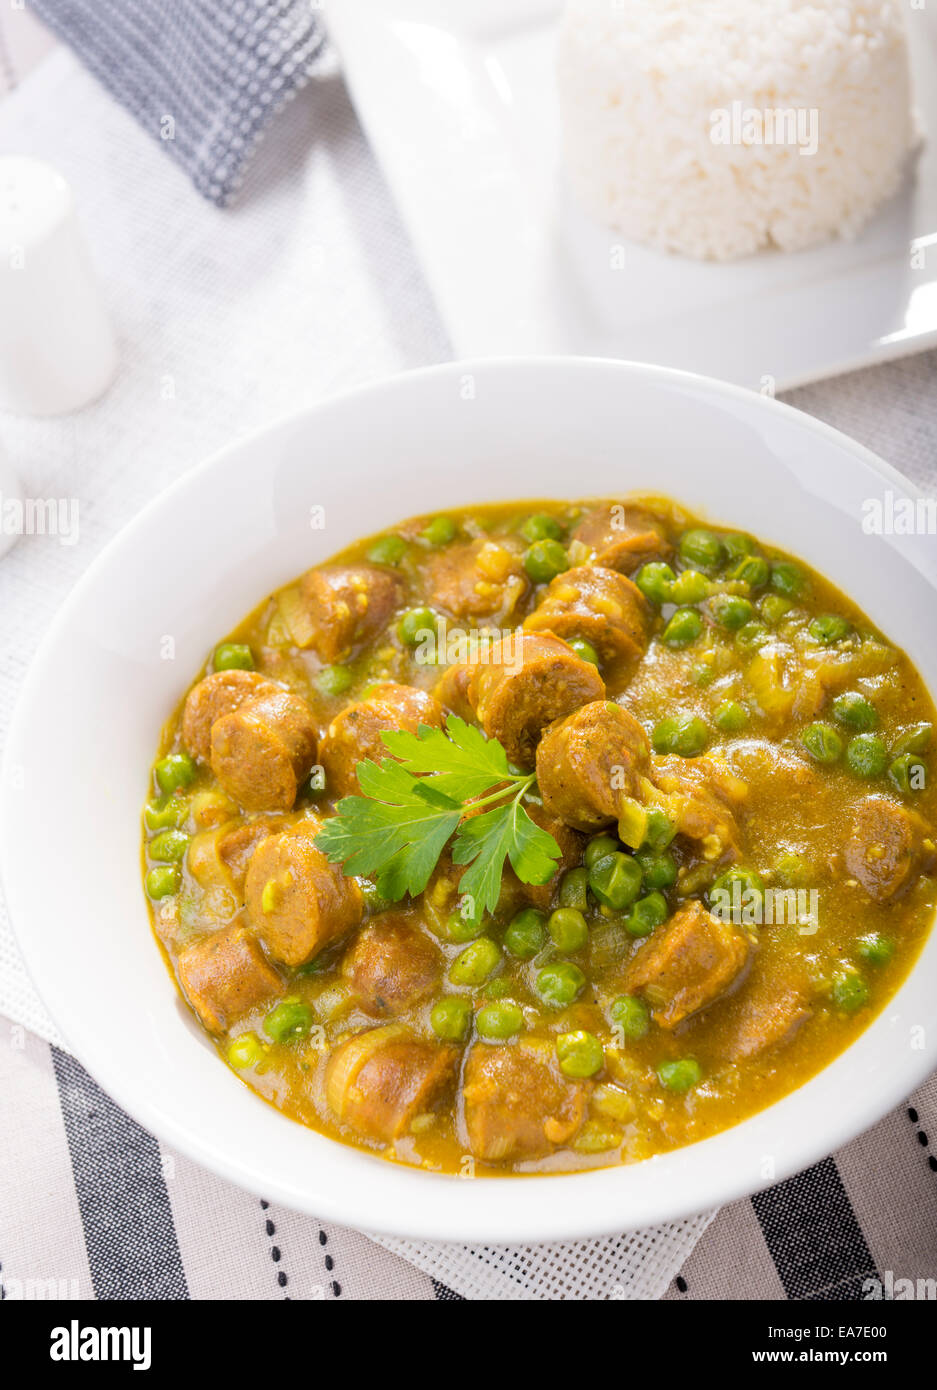 Large bowl of curried sausages with peas and a side of rice Stock Photo